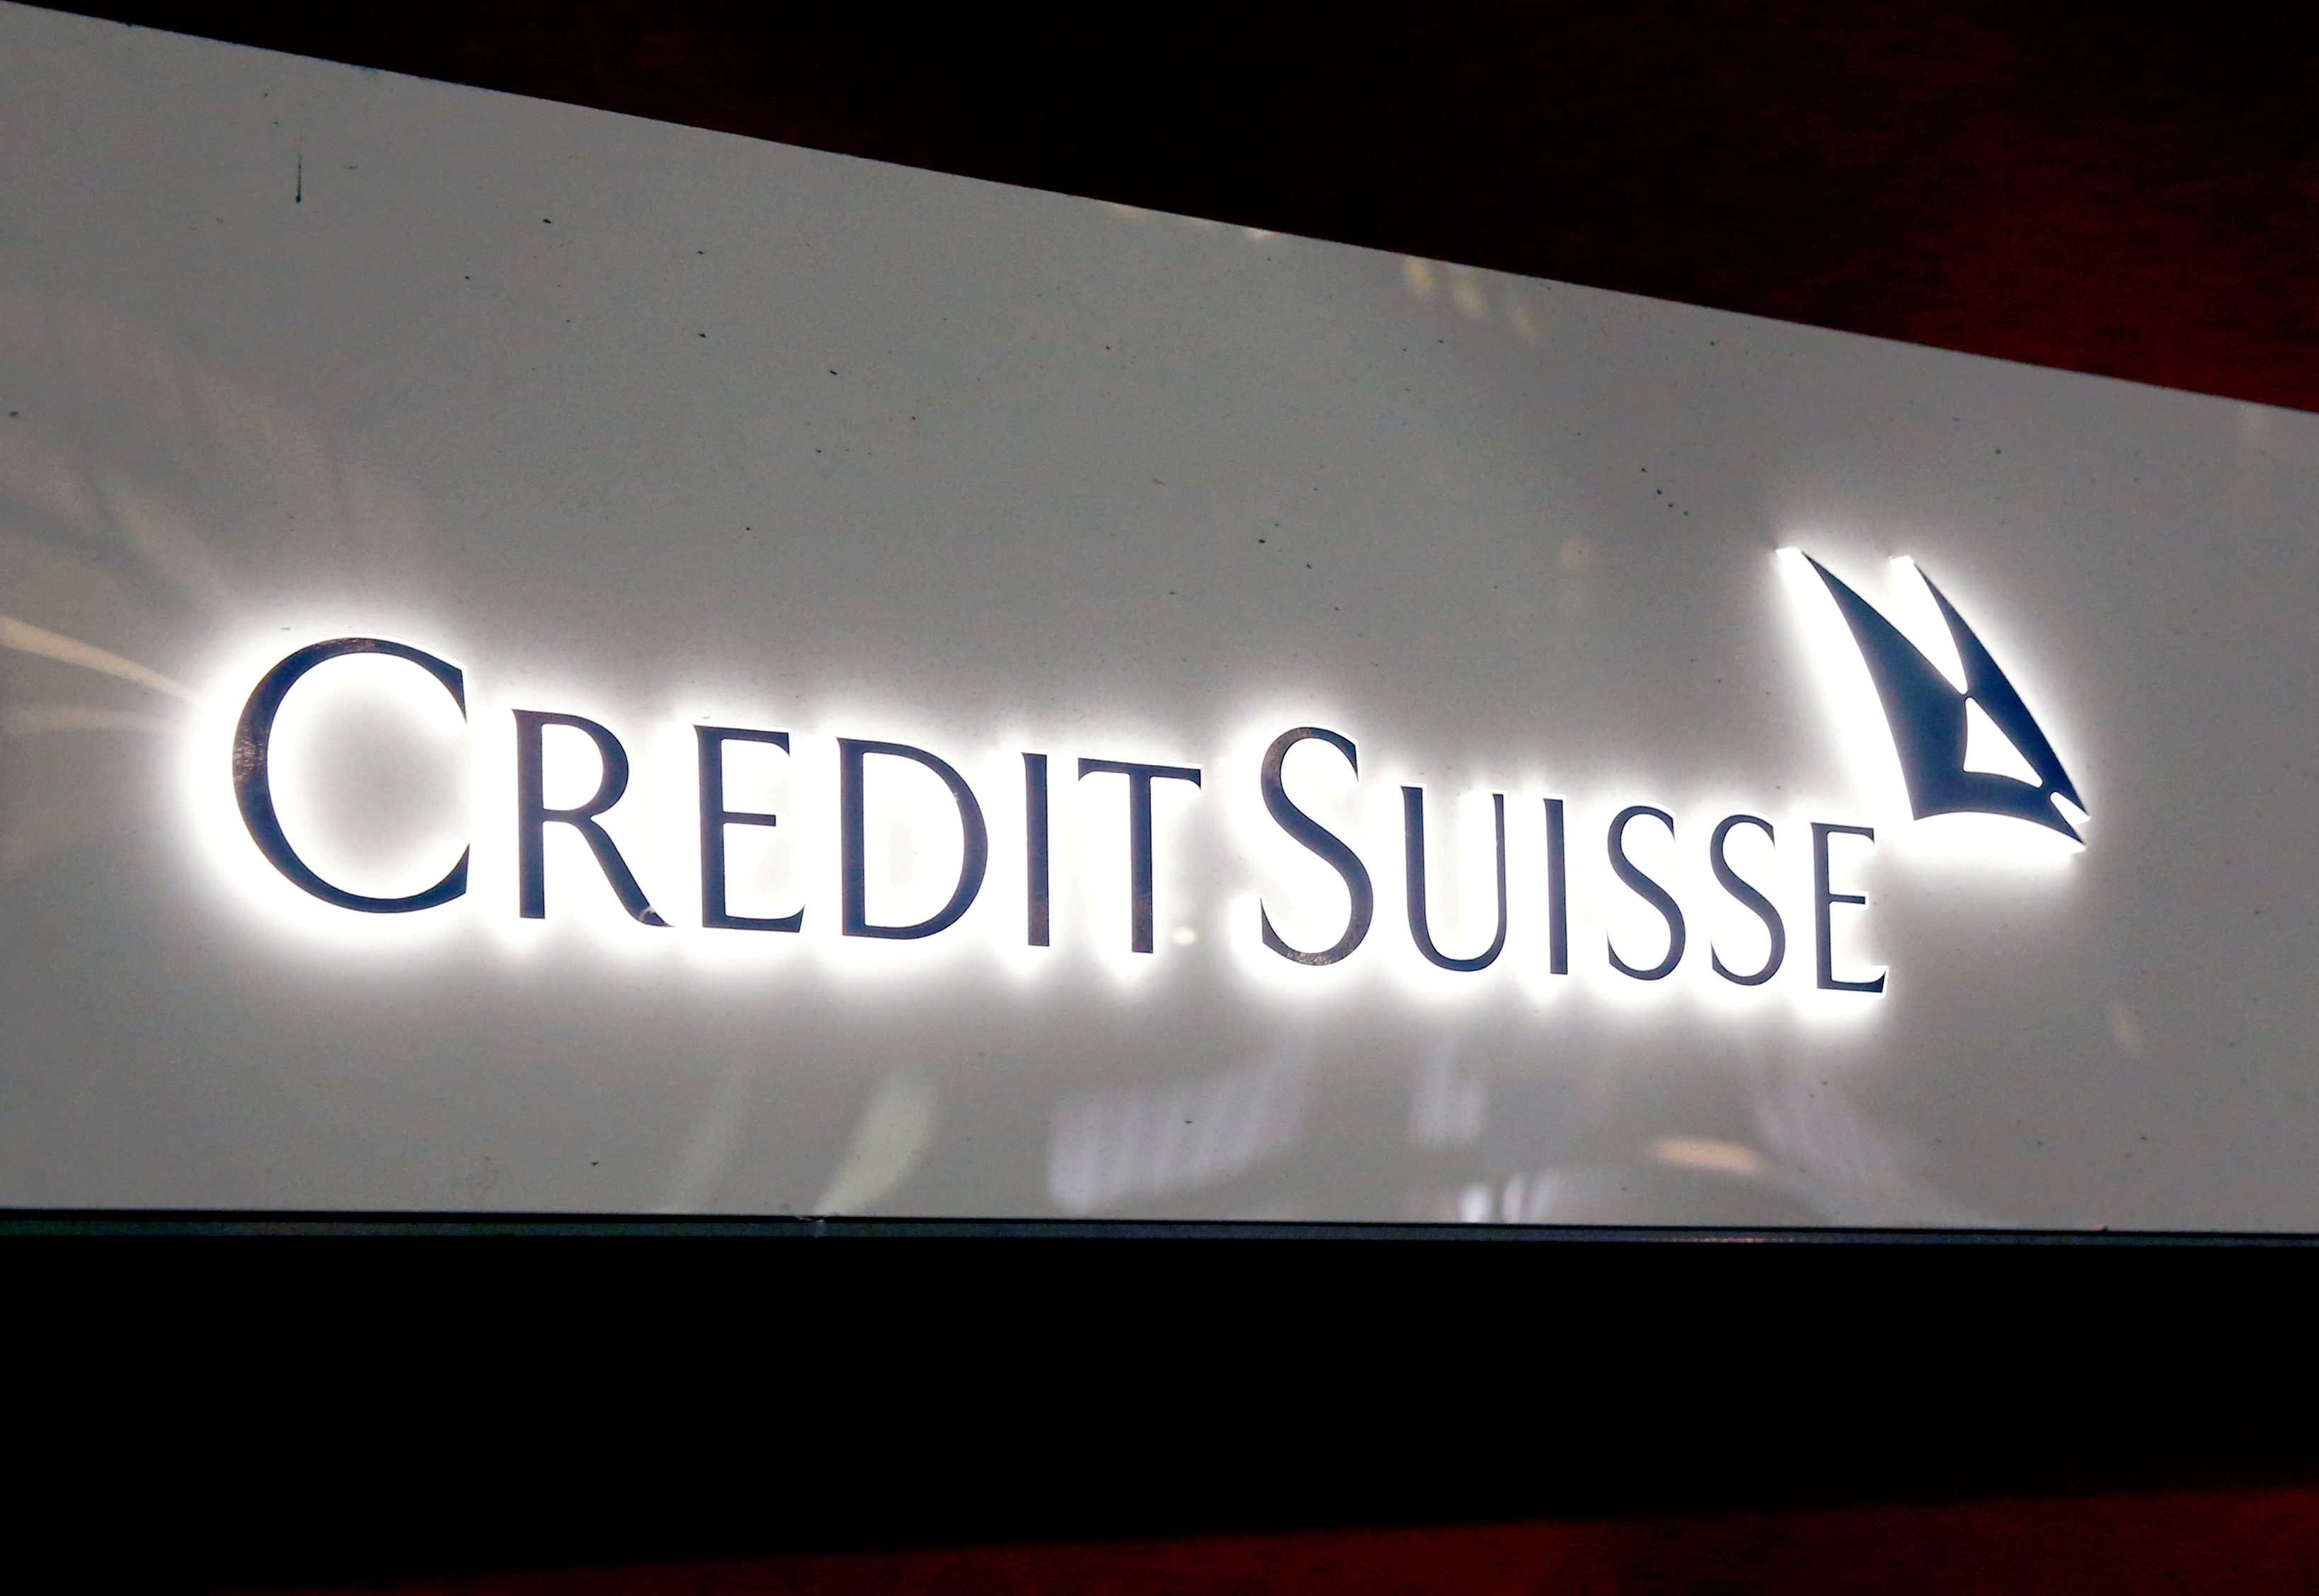 Credit Suisse strikes deal to refer hedge fund clients to BNP Paribas